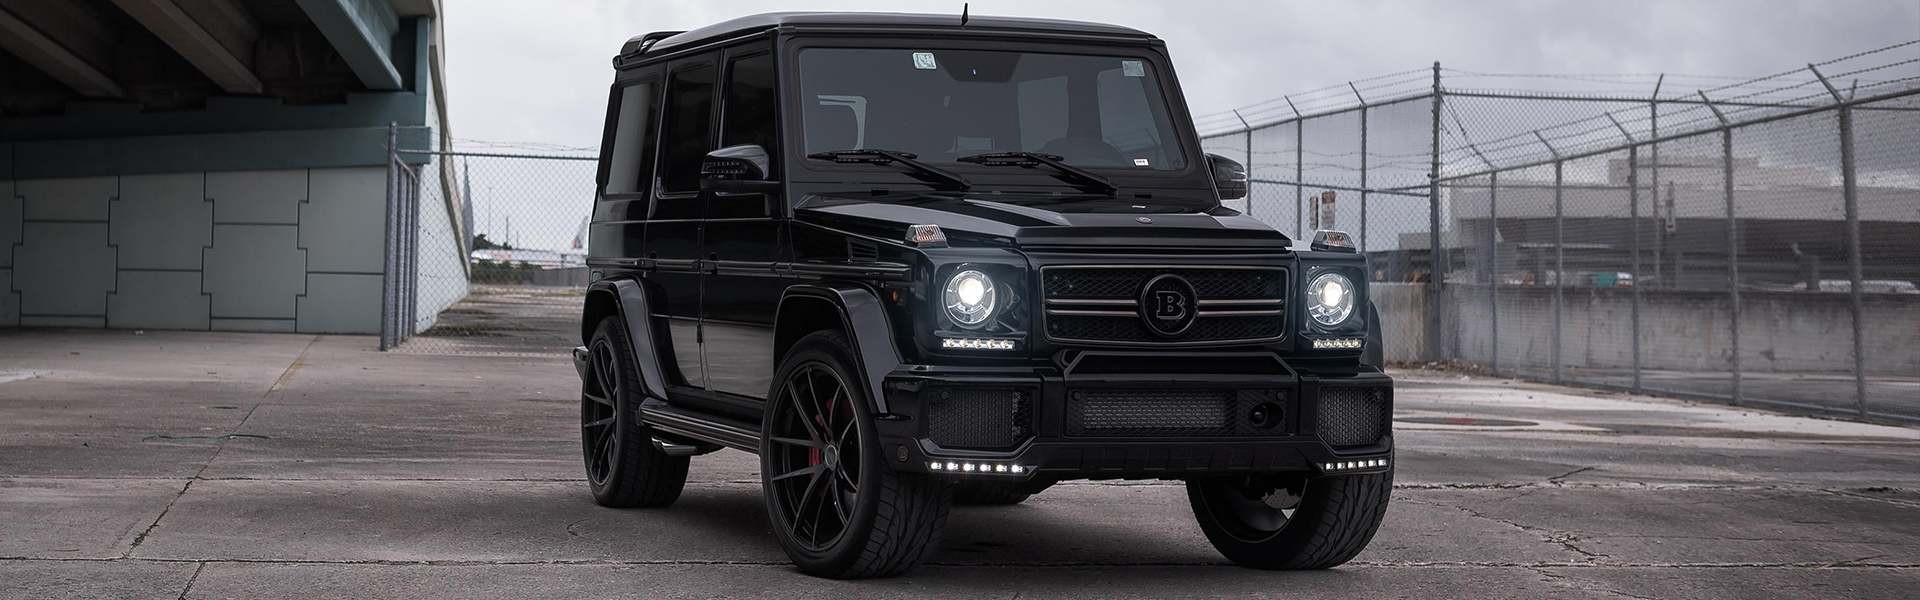 7 things you should know about Brabus